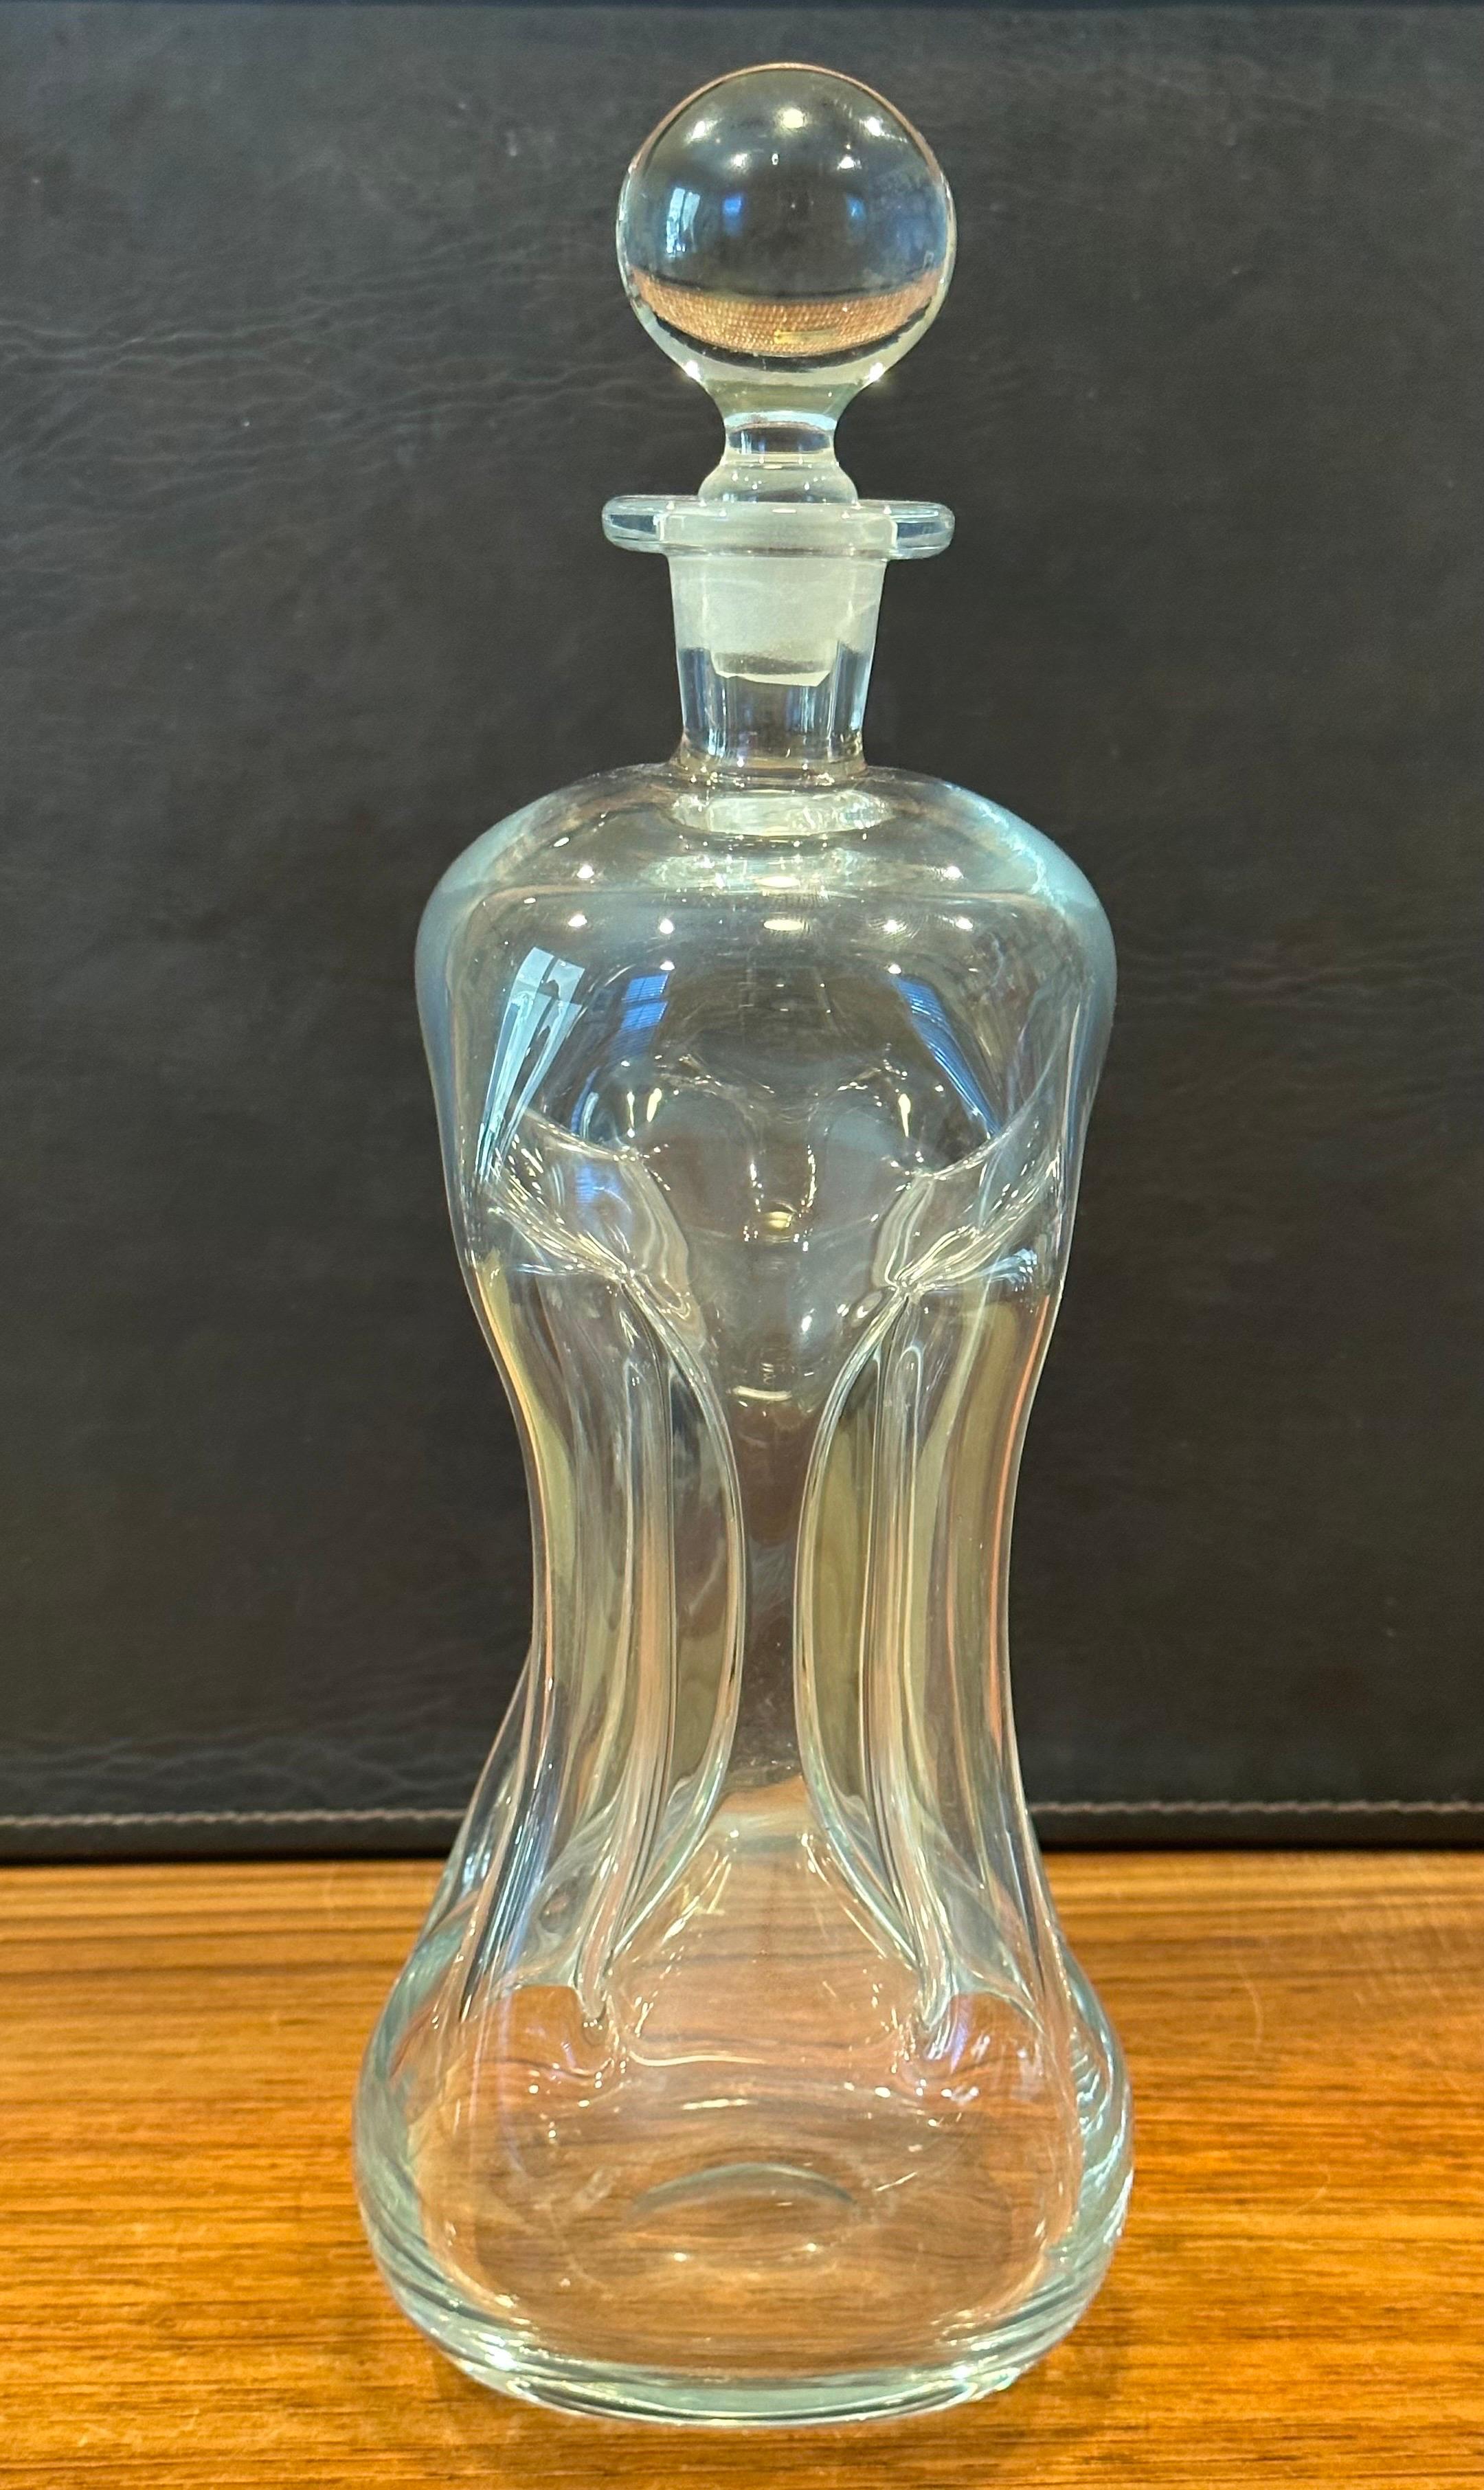 Large Clear Glass Elsinore Kluk-Kluk Decanter by Holmegaard In Good Condition For Sale In San Diego, CA